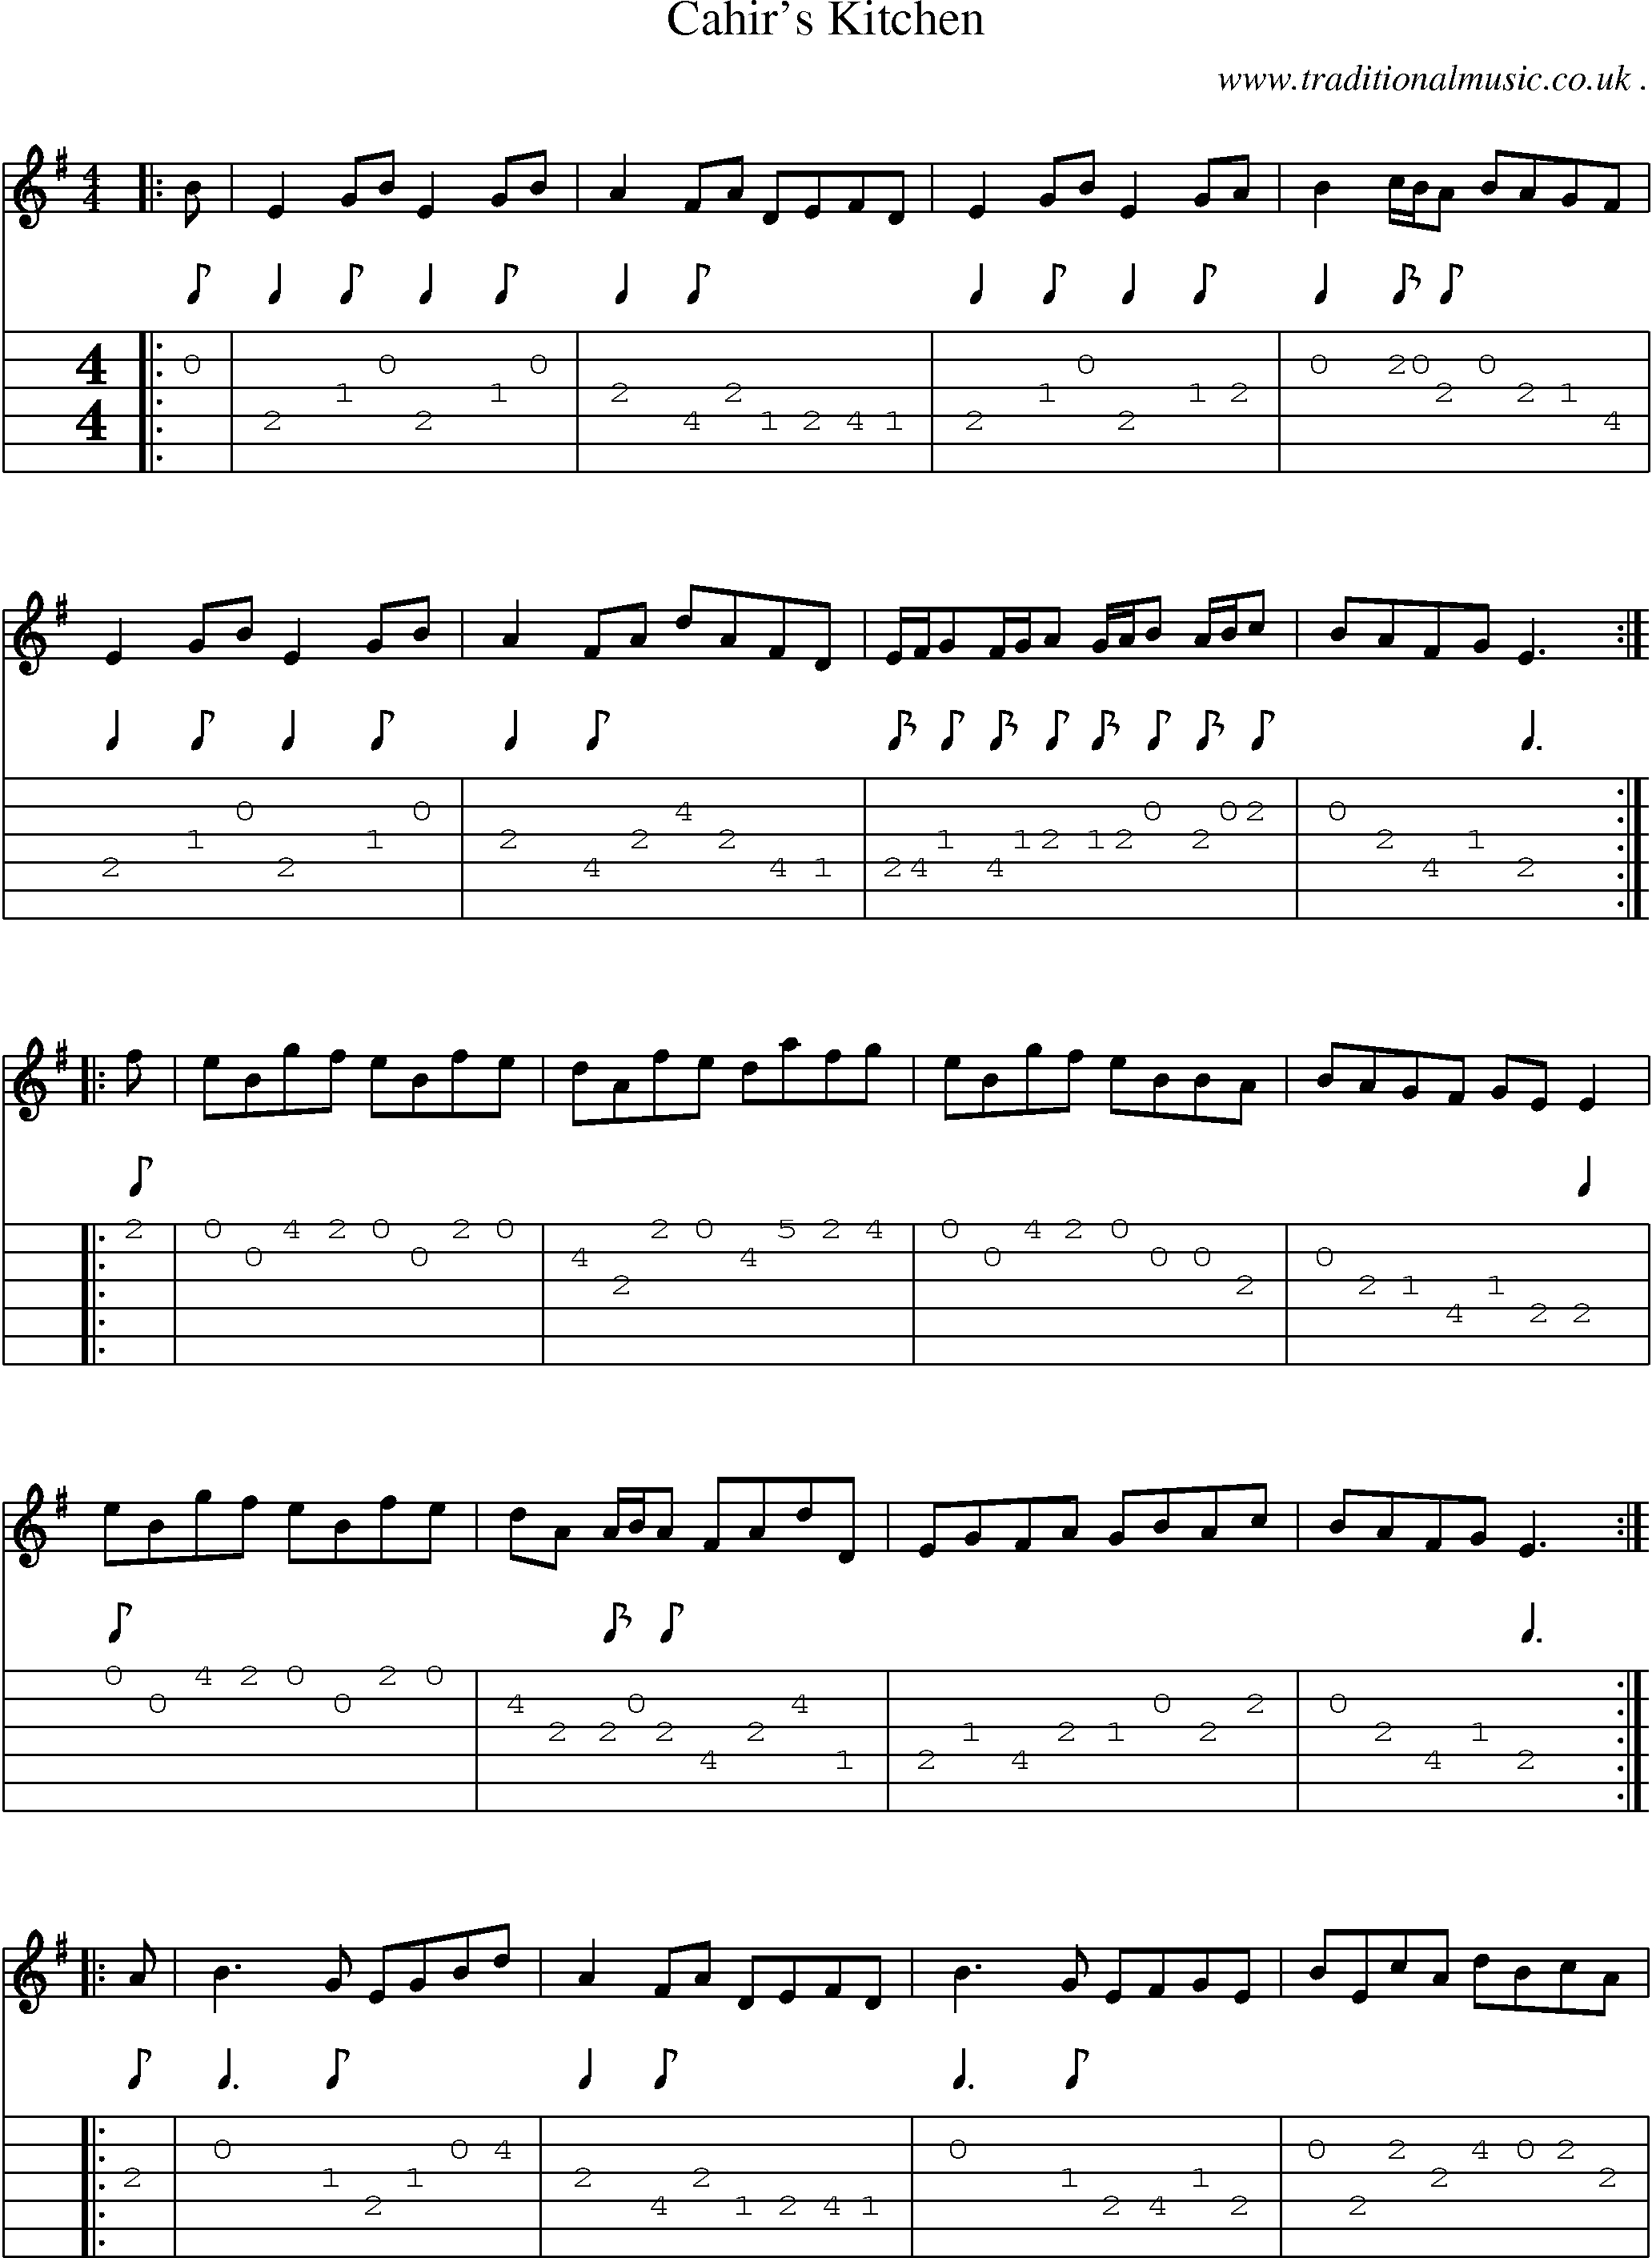 Sheet-Music and Guitar Tabs for Cahirs Kitchen